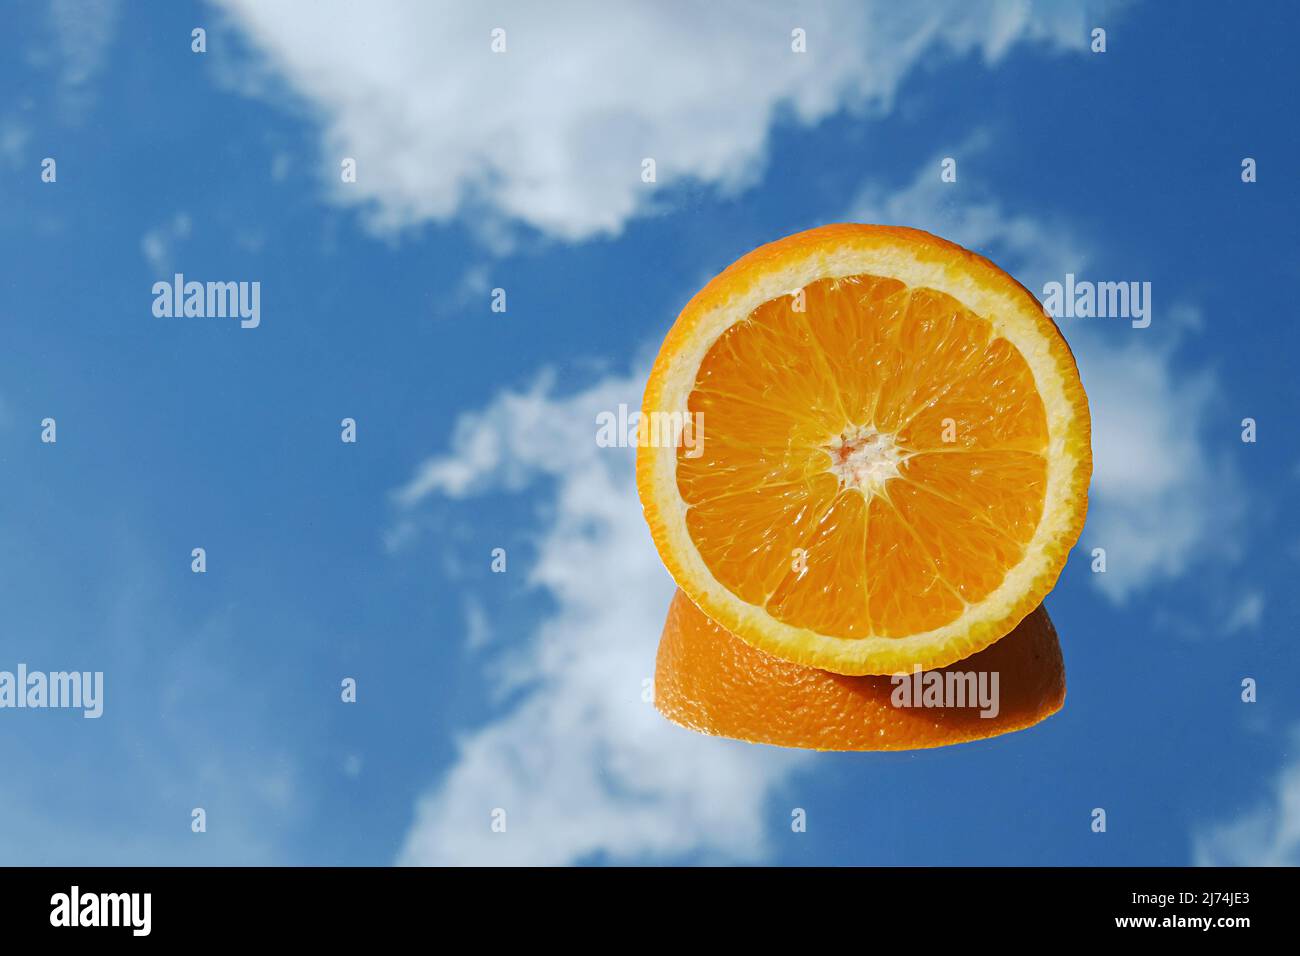 Orange citrus fruit tropical orange on blue sky and clouds background. Orange in the mirror surreal minimal concept. Stock Photo